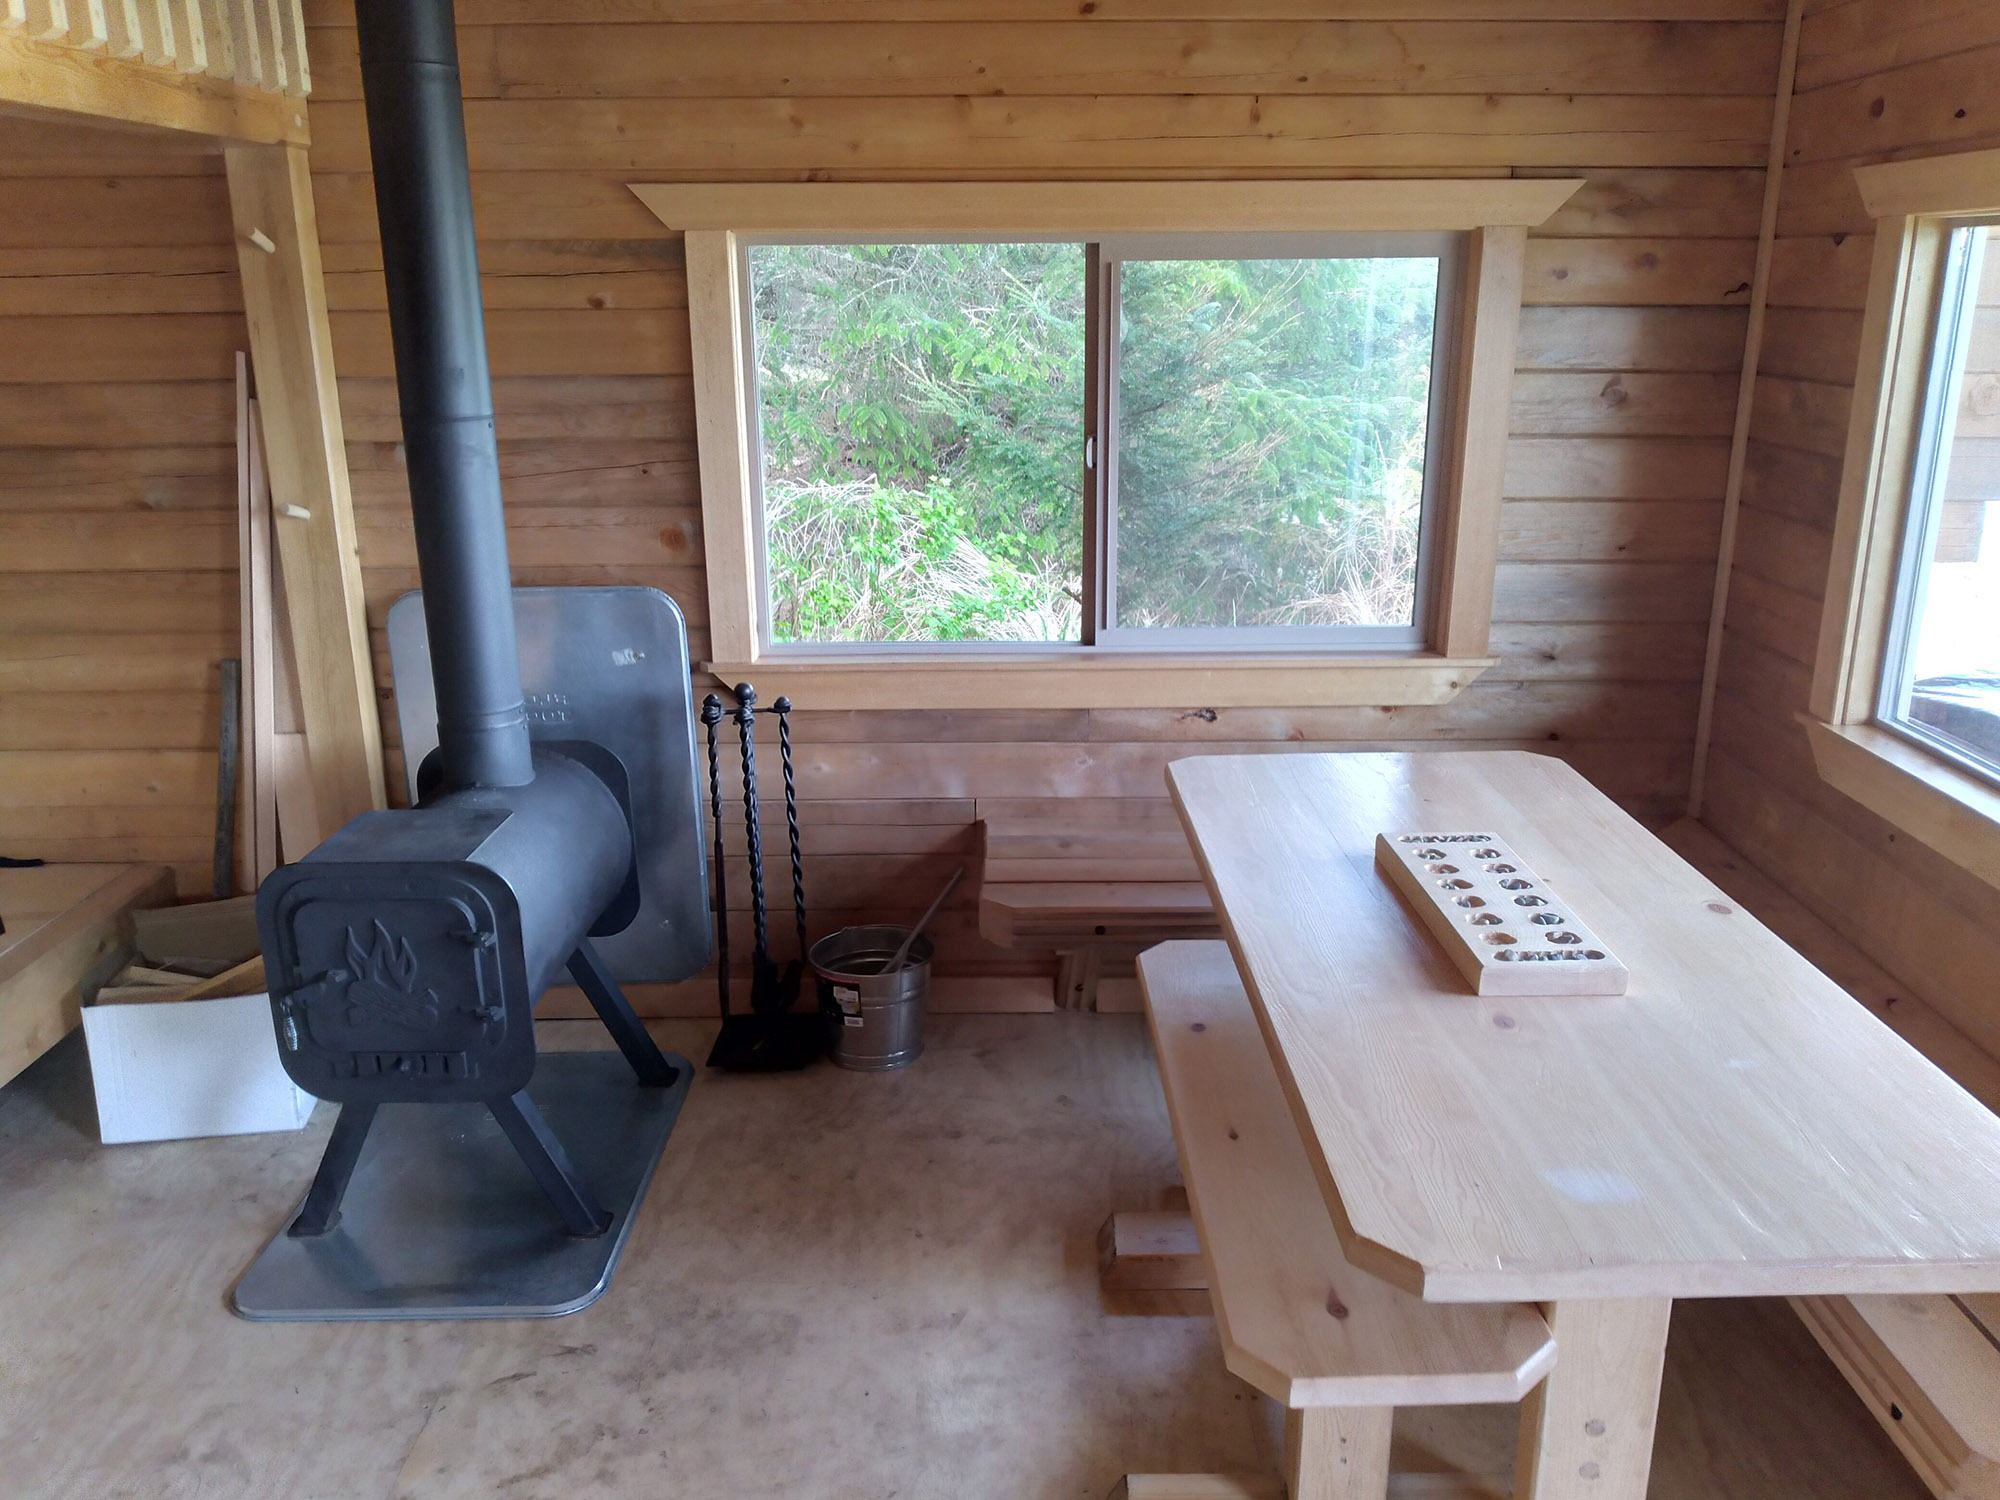 Clover Beach Cabin Interior Stove and table